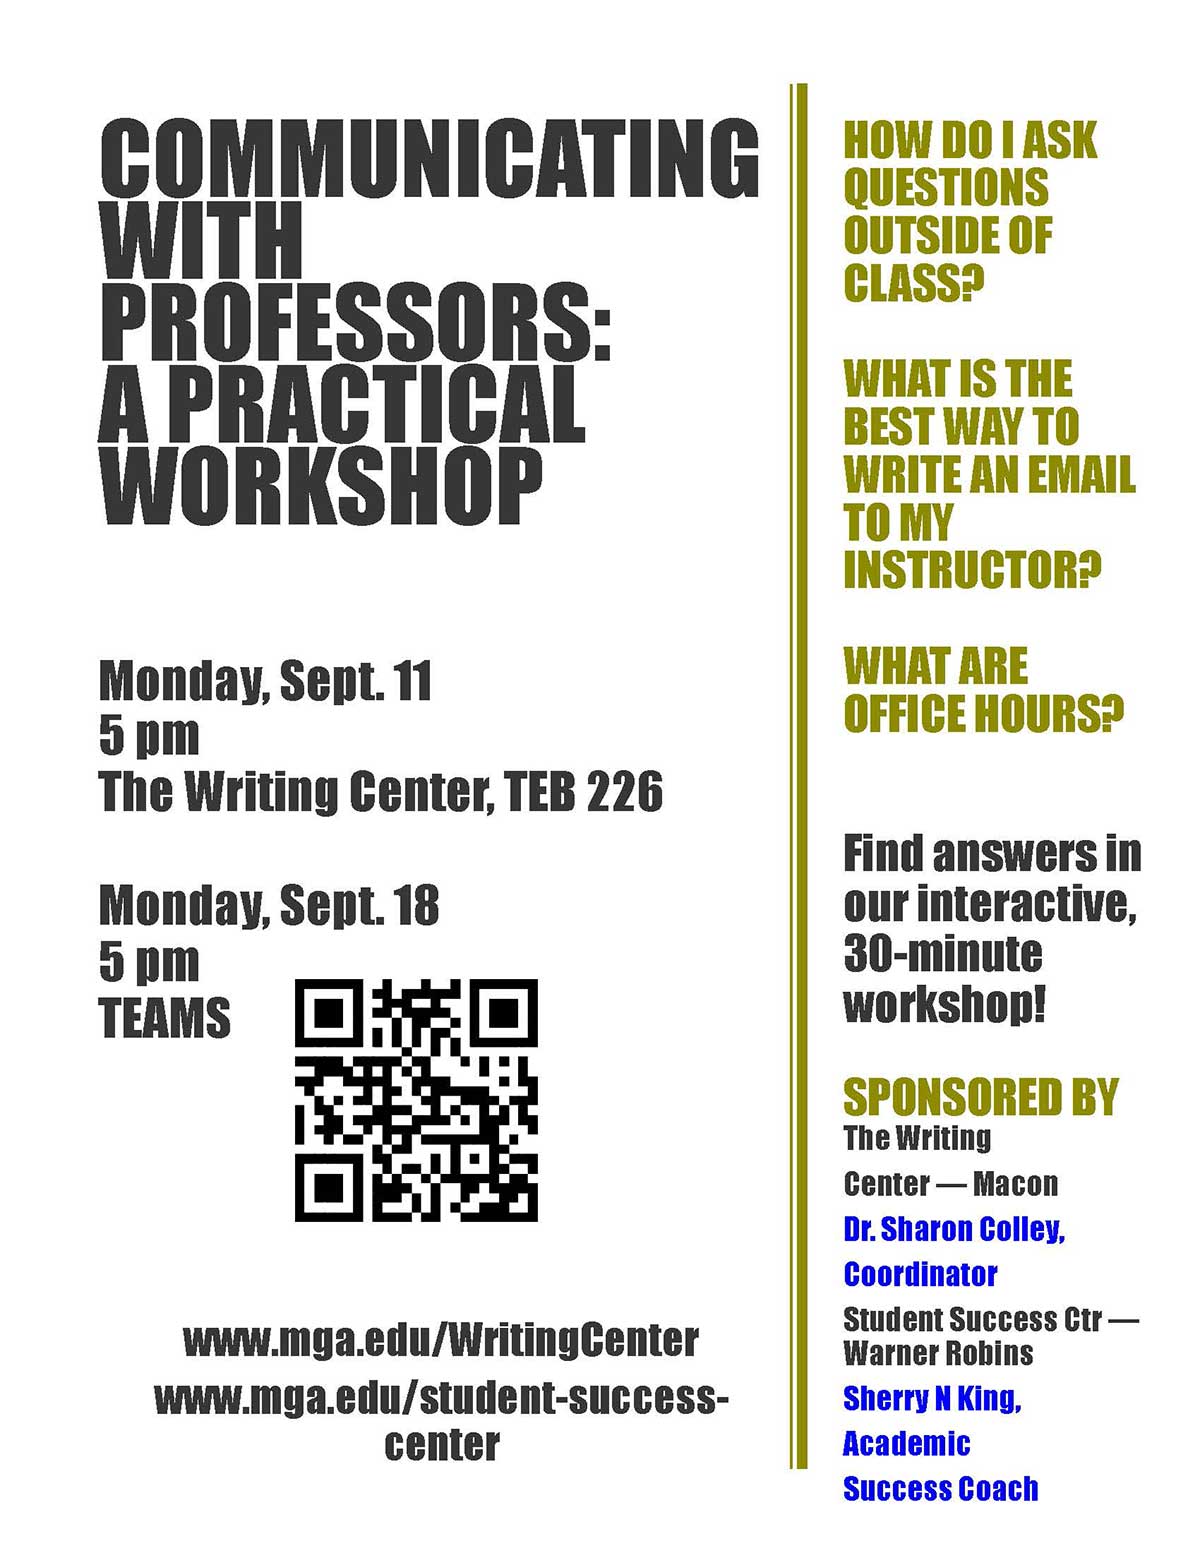 Communicating with Professors: A Practical Workshop flyer.